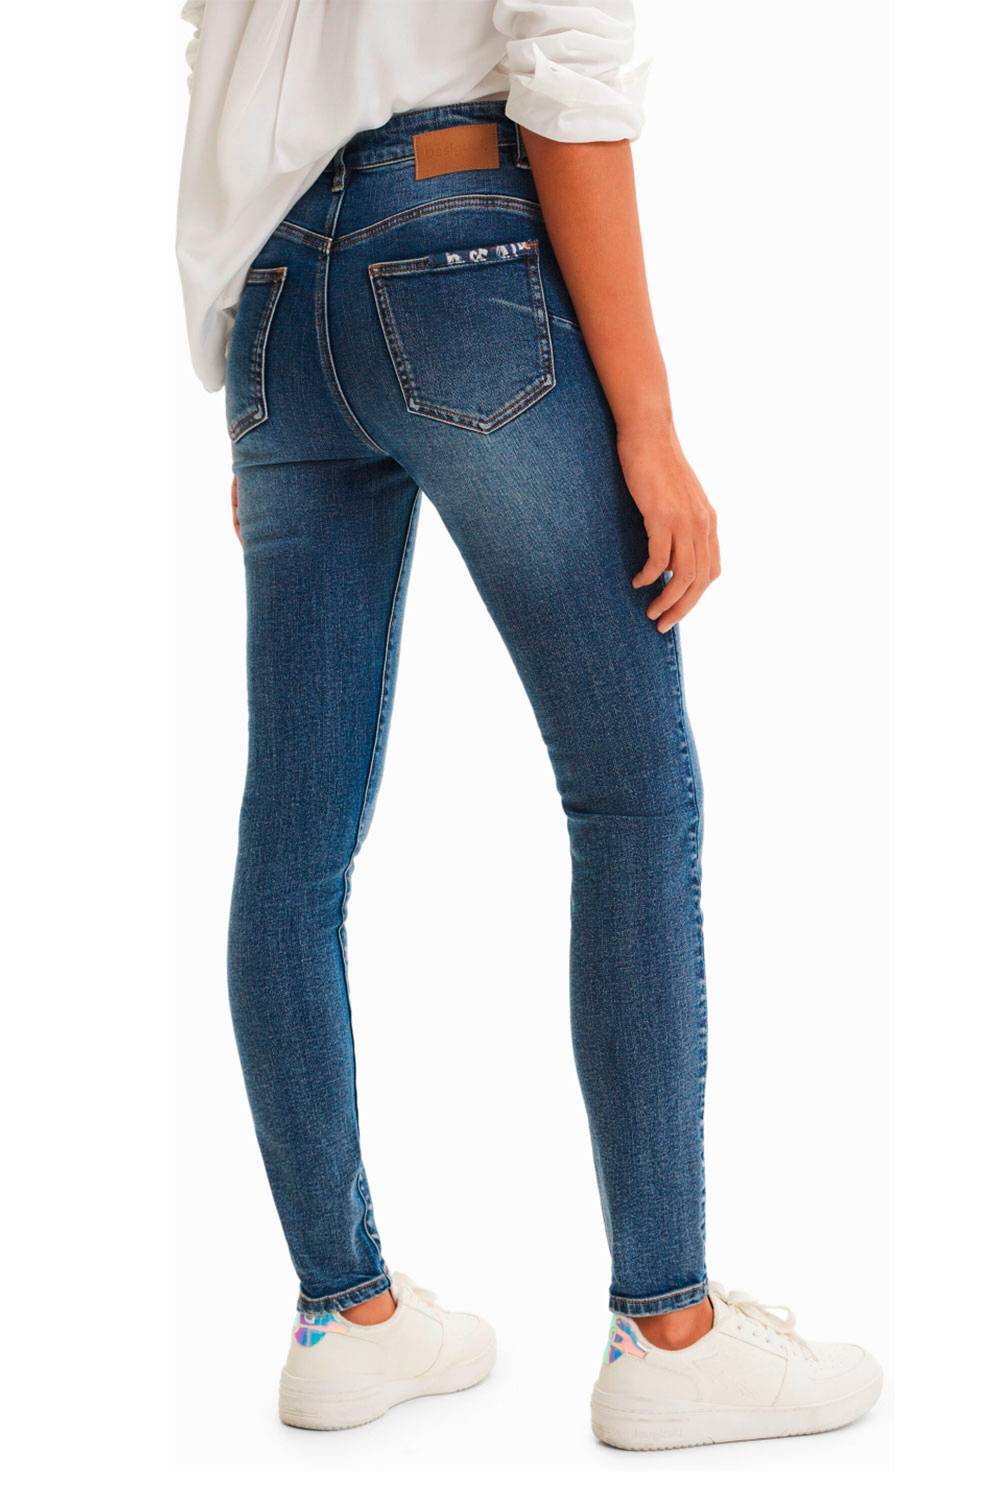 jeans rectos mujer